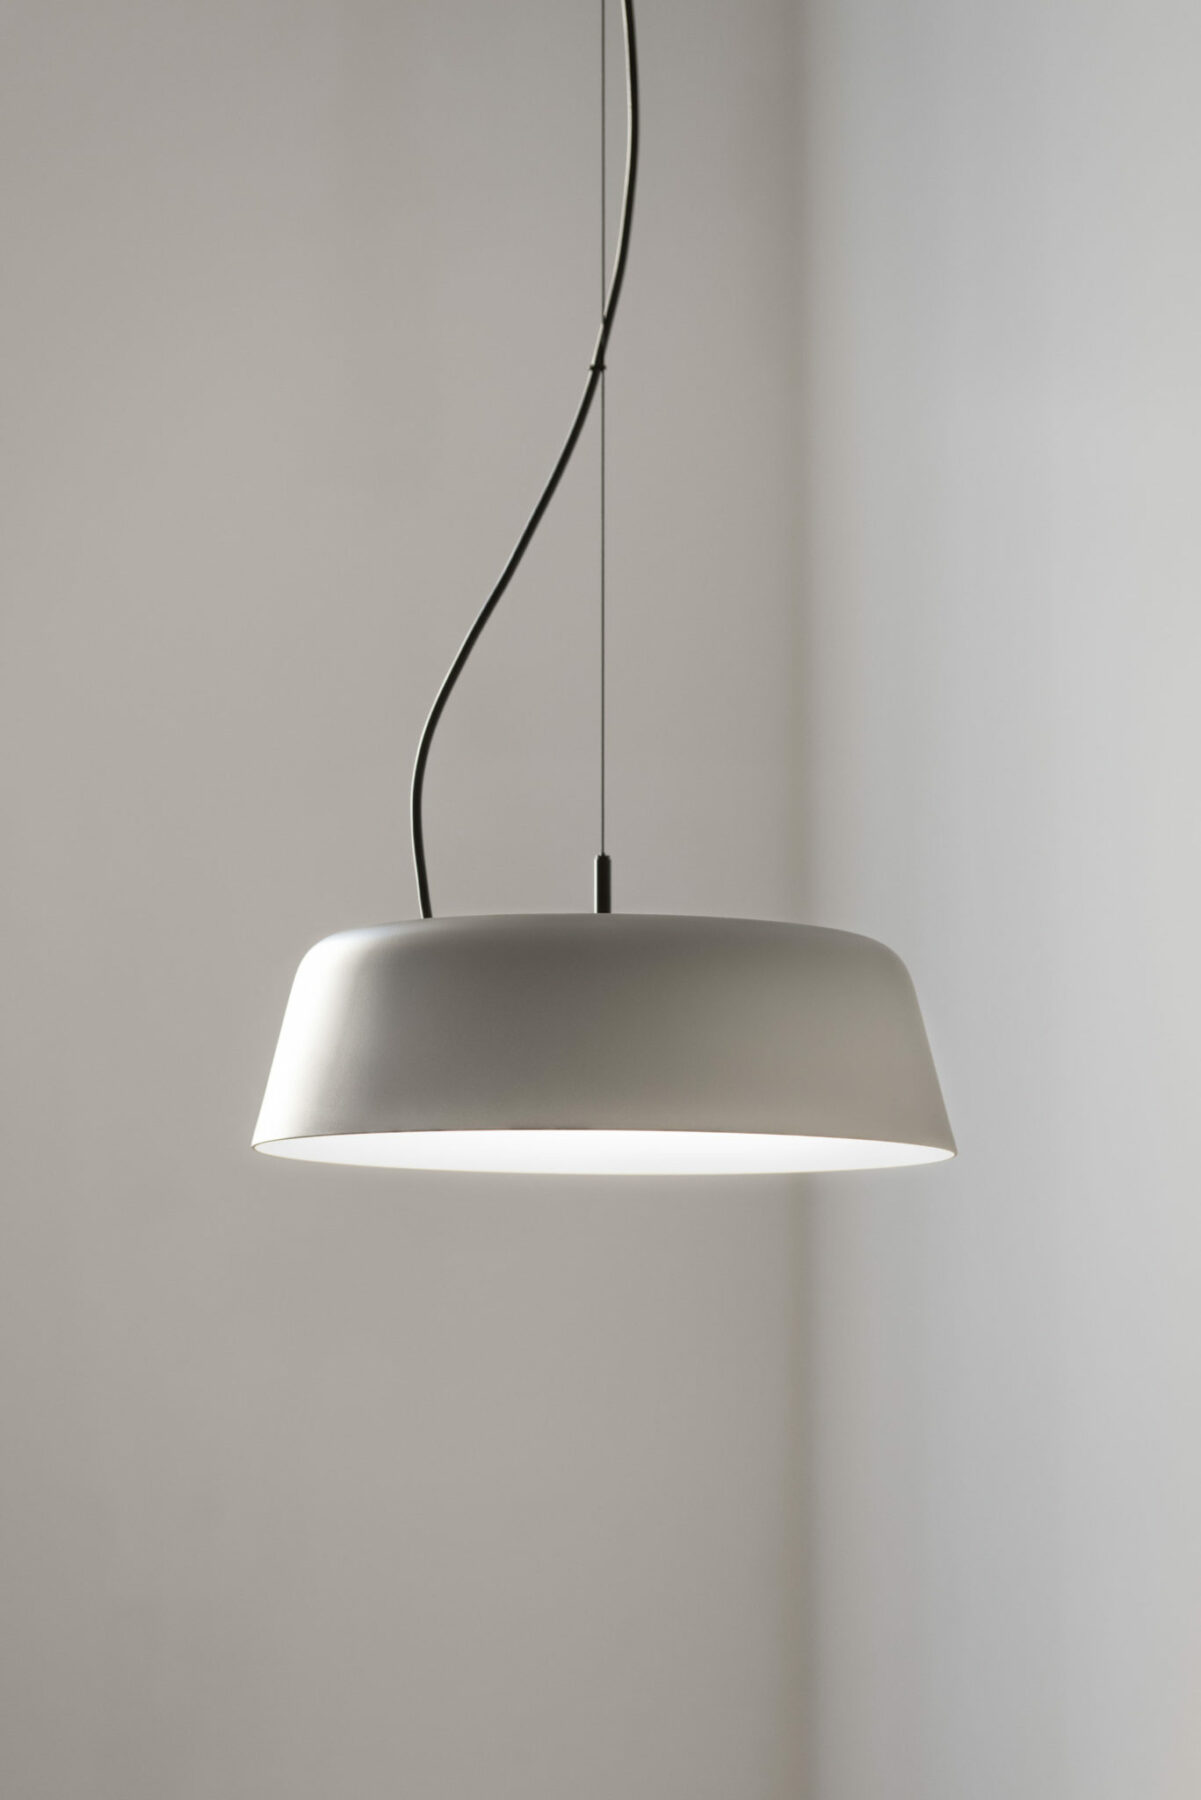 Bowl LED pendant light, in light grey matt powder-coated metal, with black cable and wire rope.